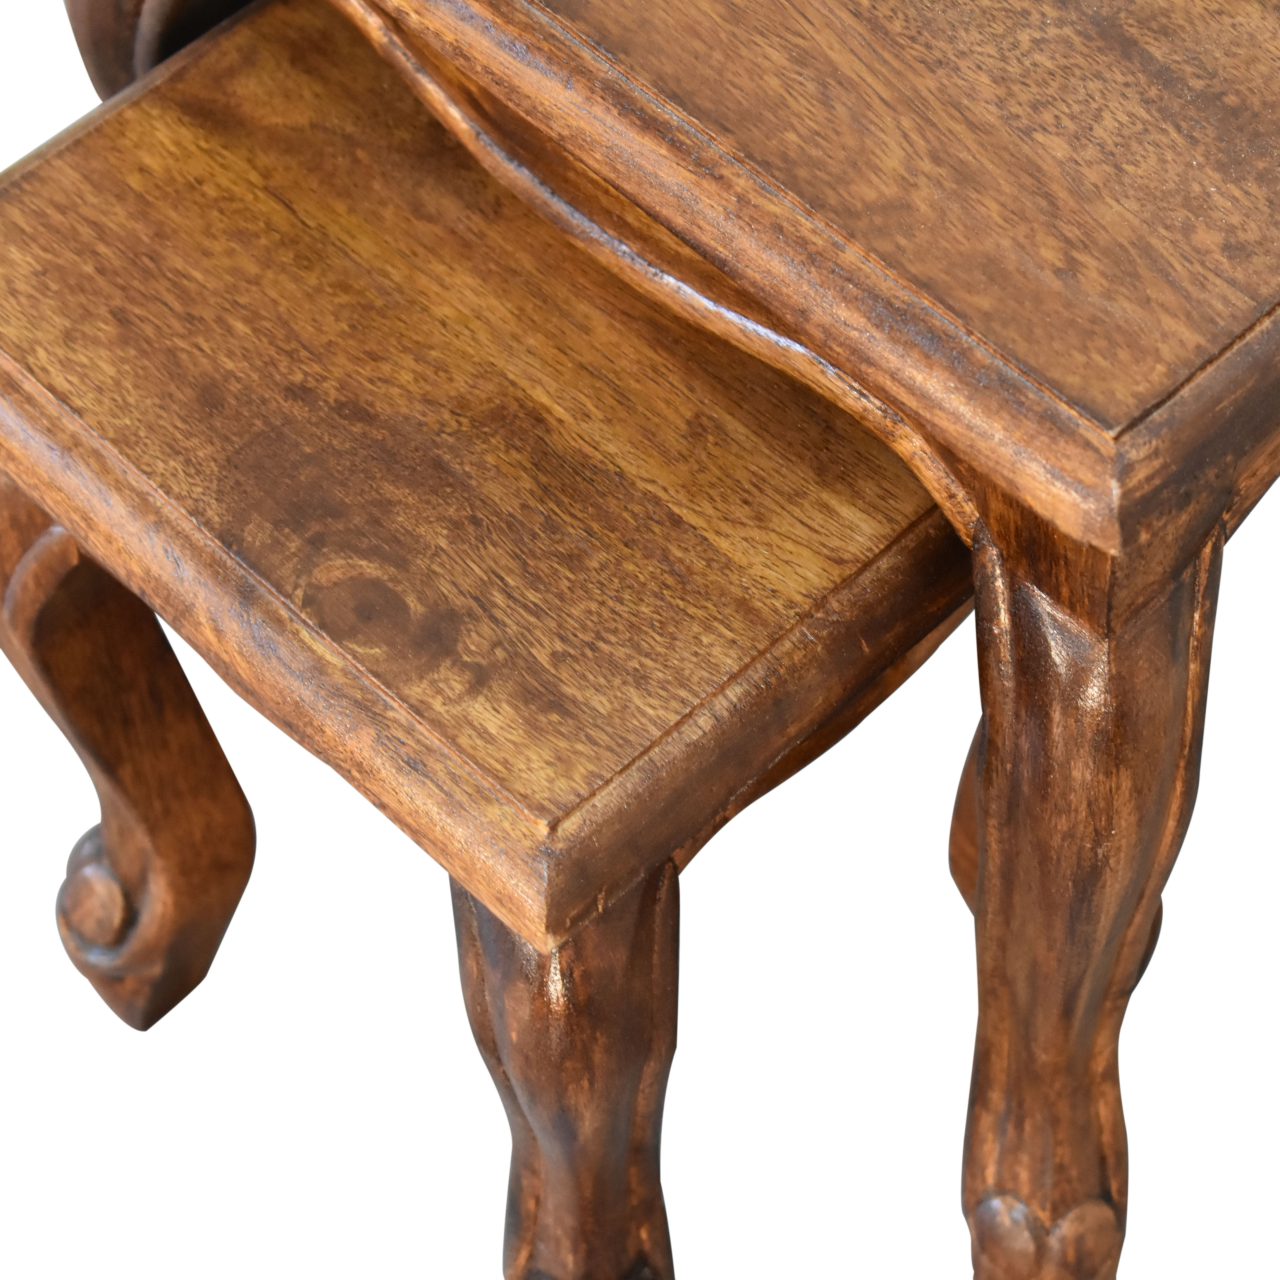 Chestnut French Style 2 Stool Set Two Small Tables Solid Mango Wood - CasaFenix